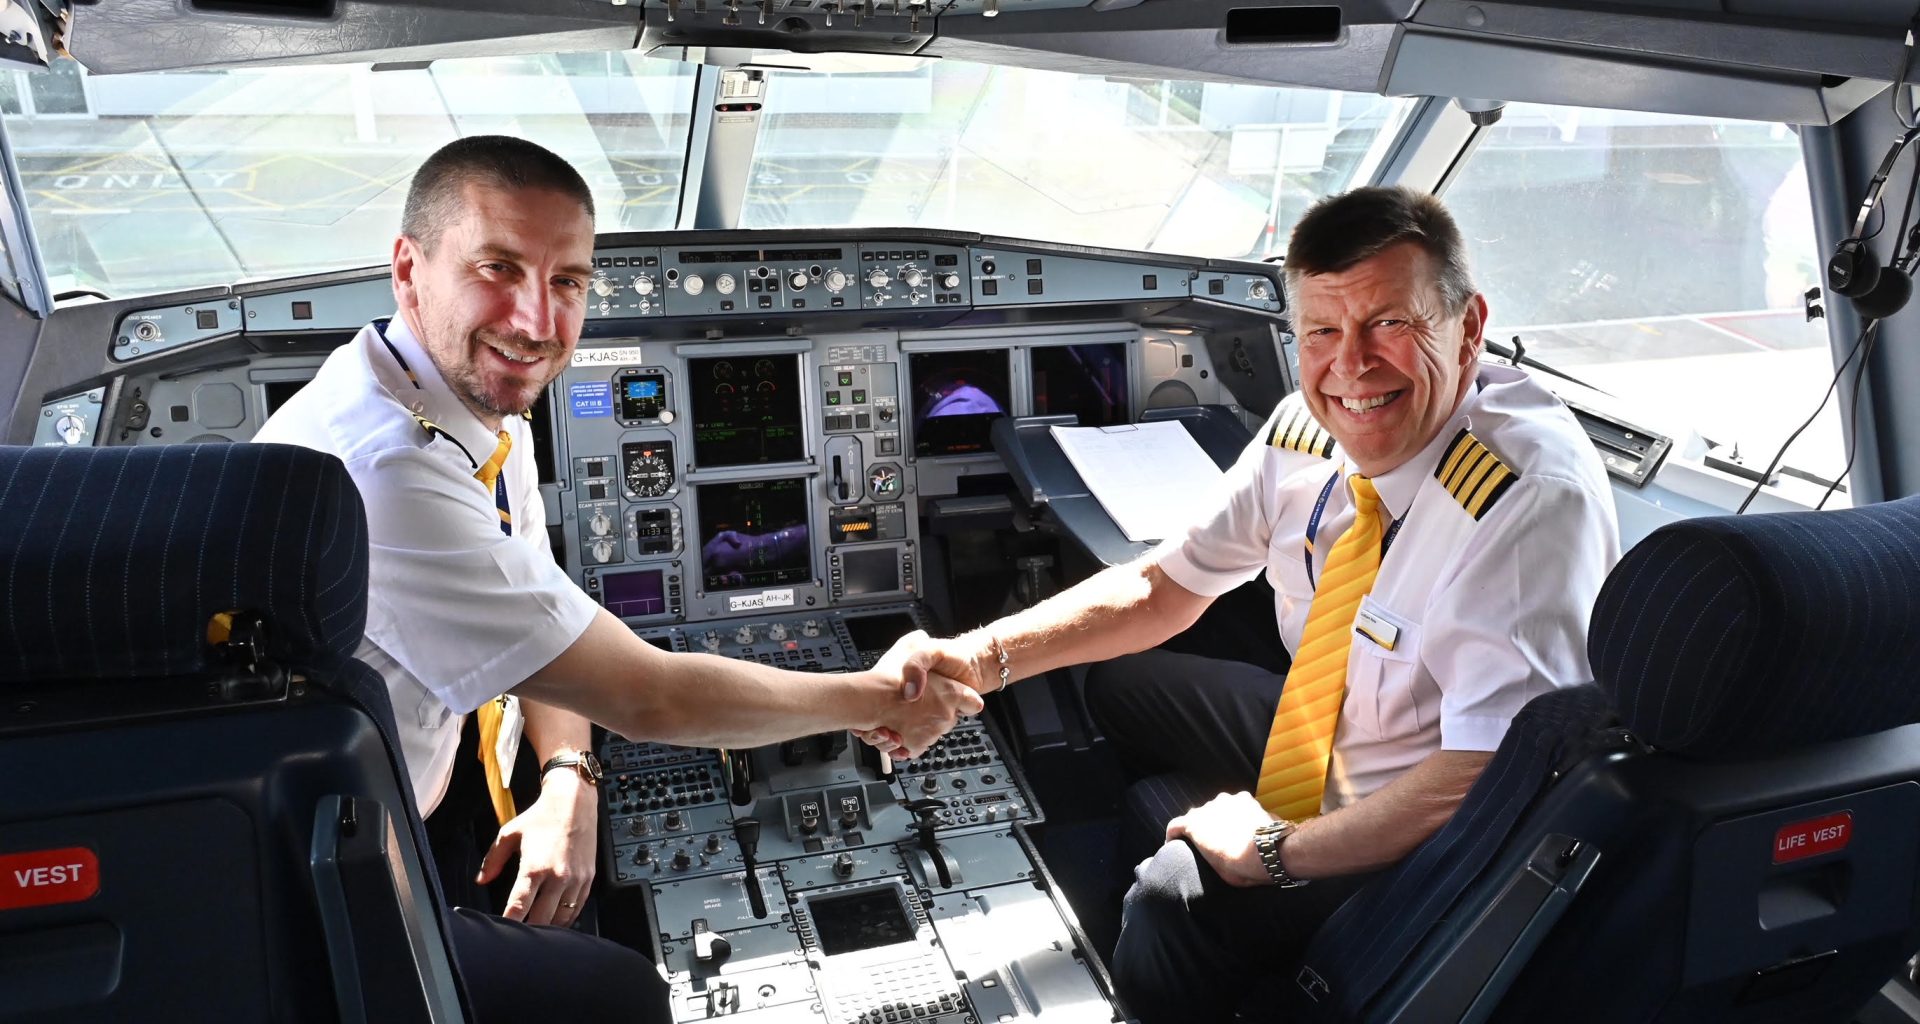 Two male pilots in cockpit look into camera, shaking hands.